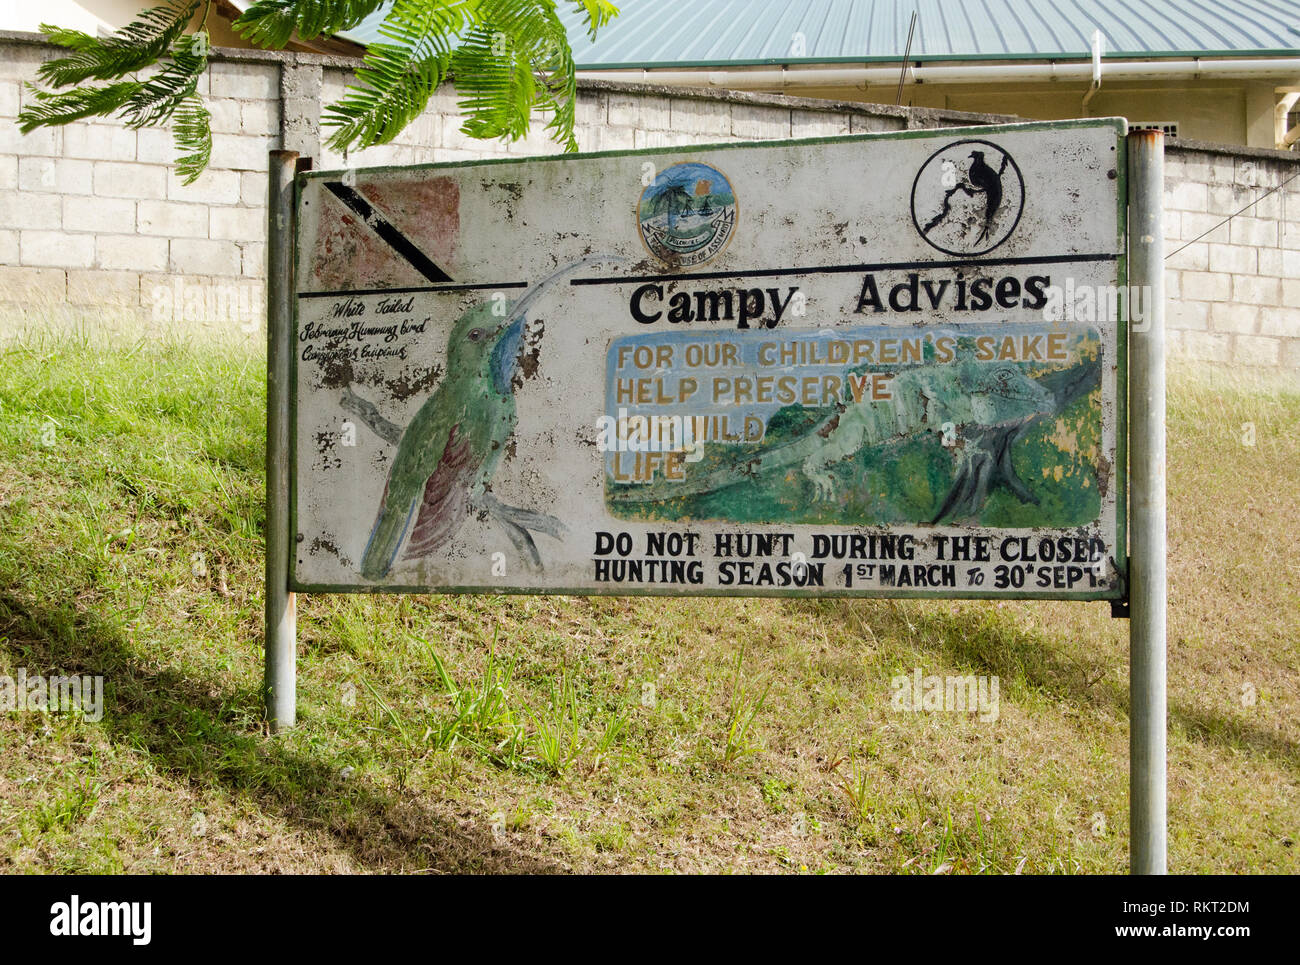 SCARBOROUGH, TRINIDAD AND TOBAGO - JANUARY 7, 2019:  A handpainted sign promoting anti-hunting law on the island of Tobago.  Featuring 'Campy' the whi Stock Photo